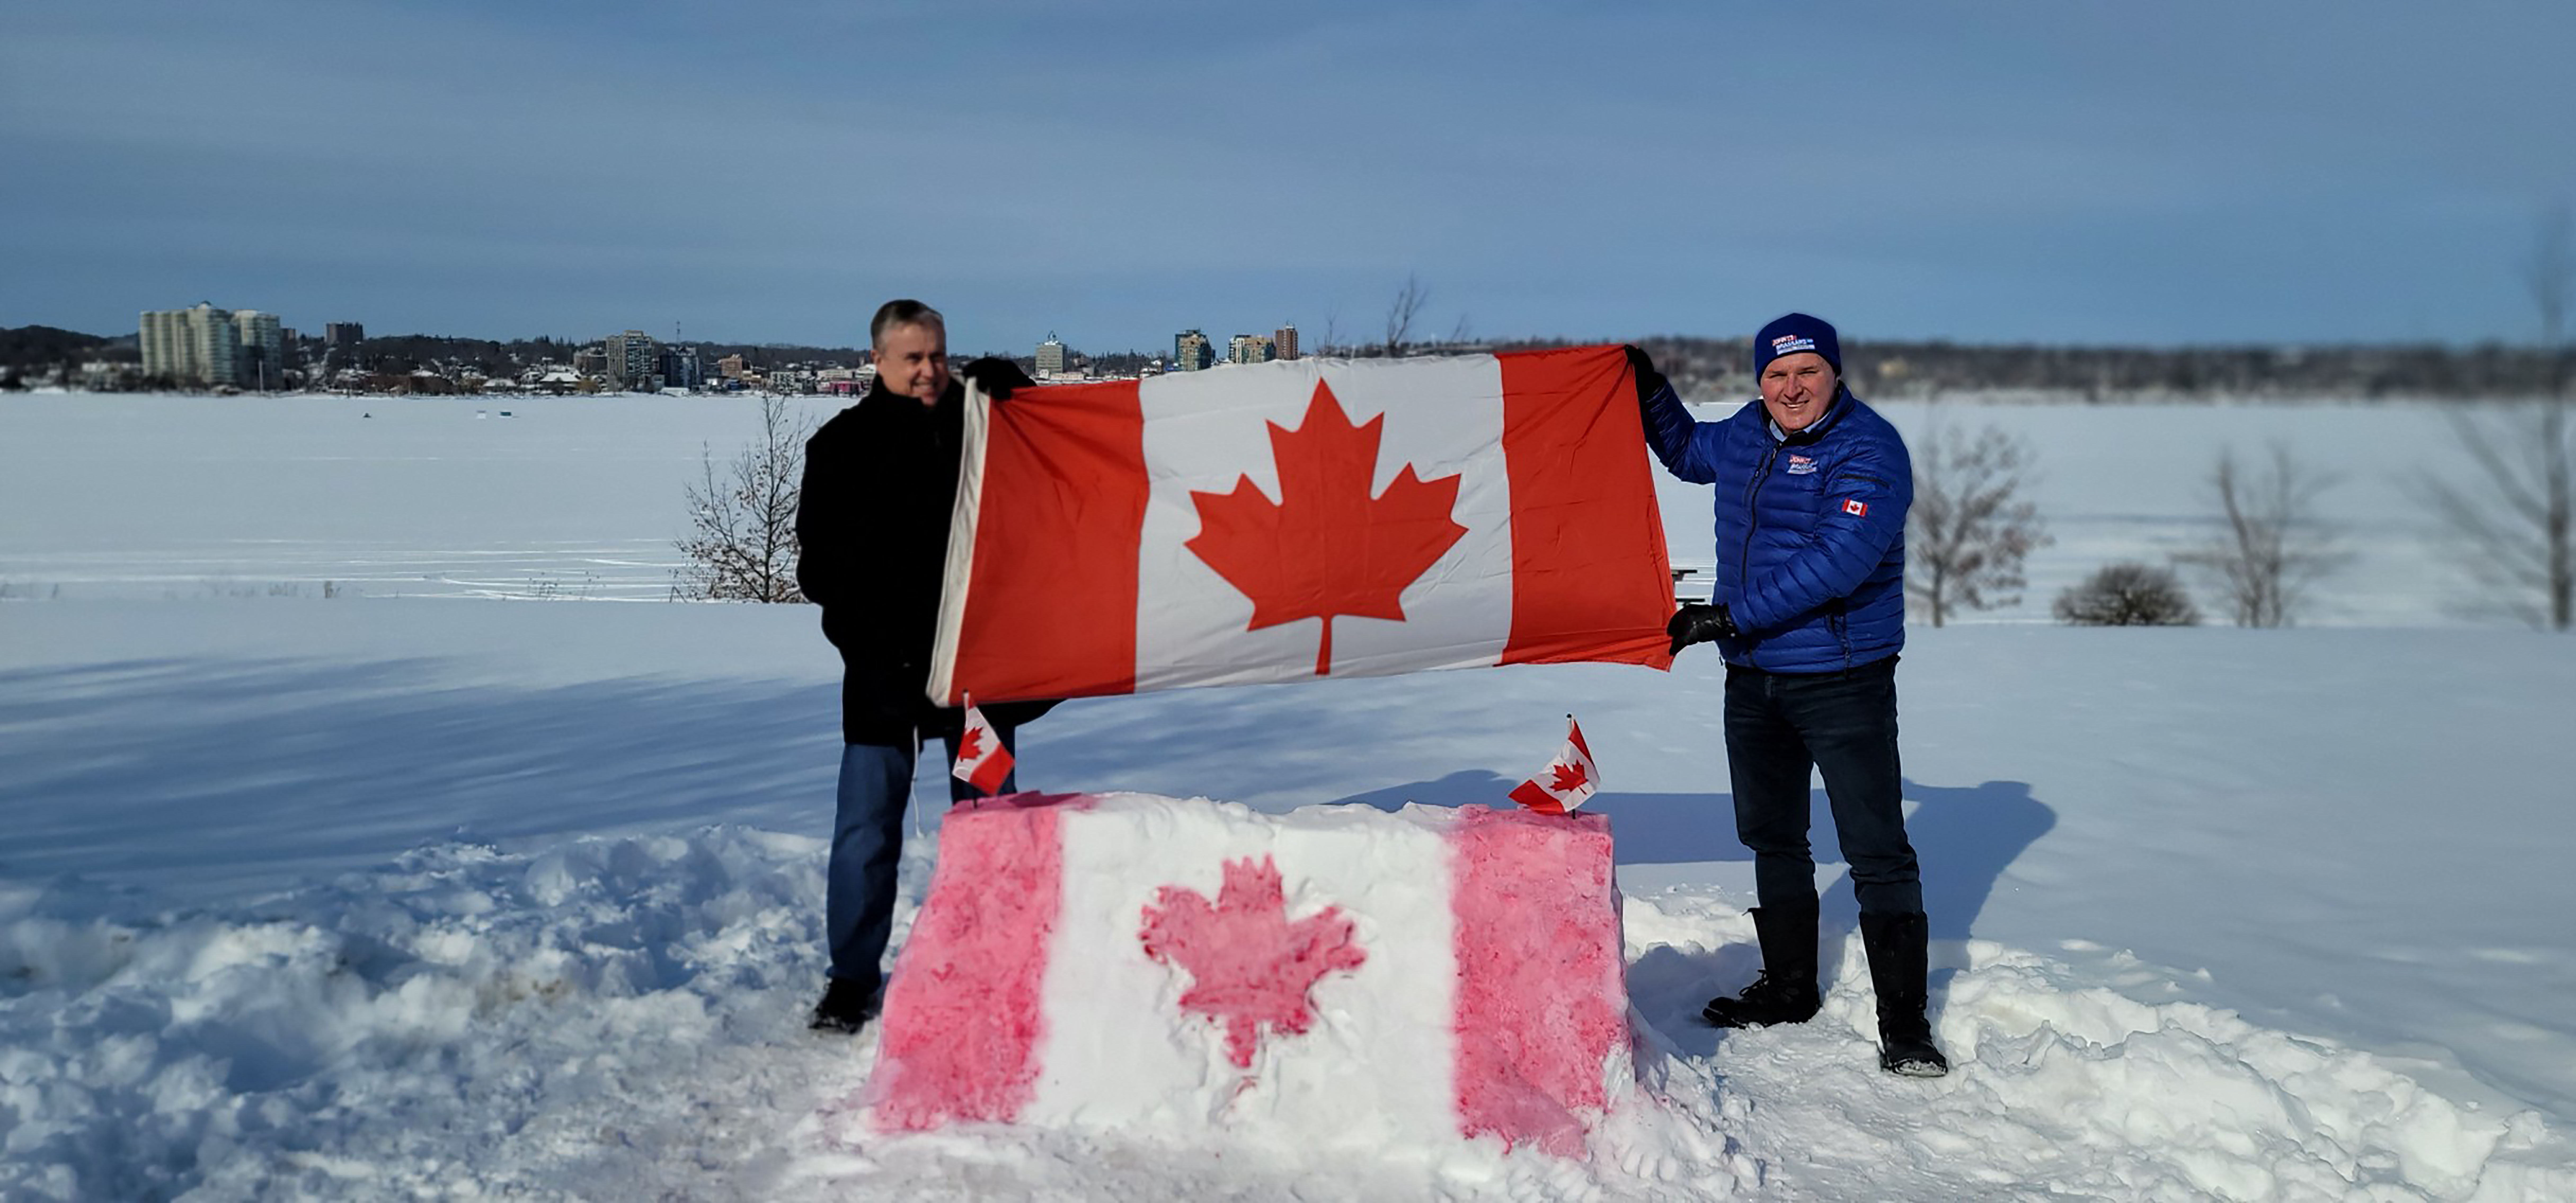 MPs Shipley and Brassard launch snow sculpture contest.